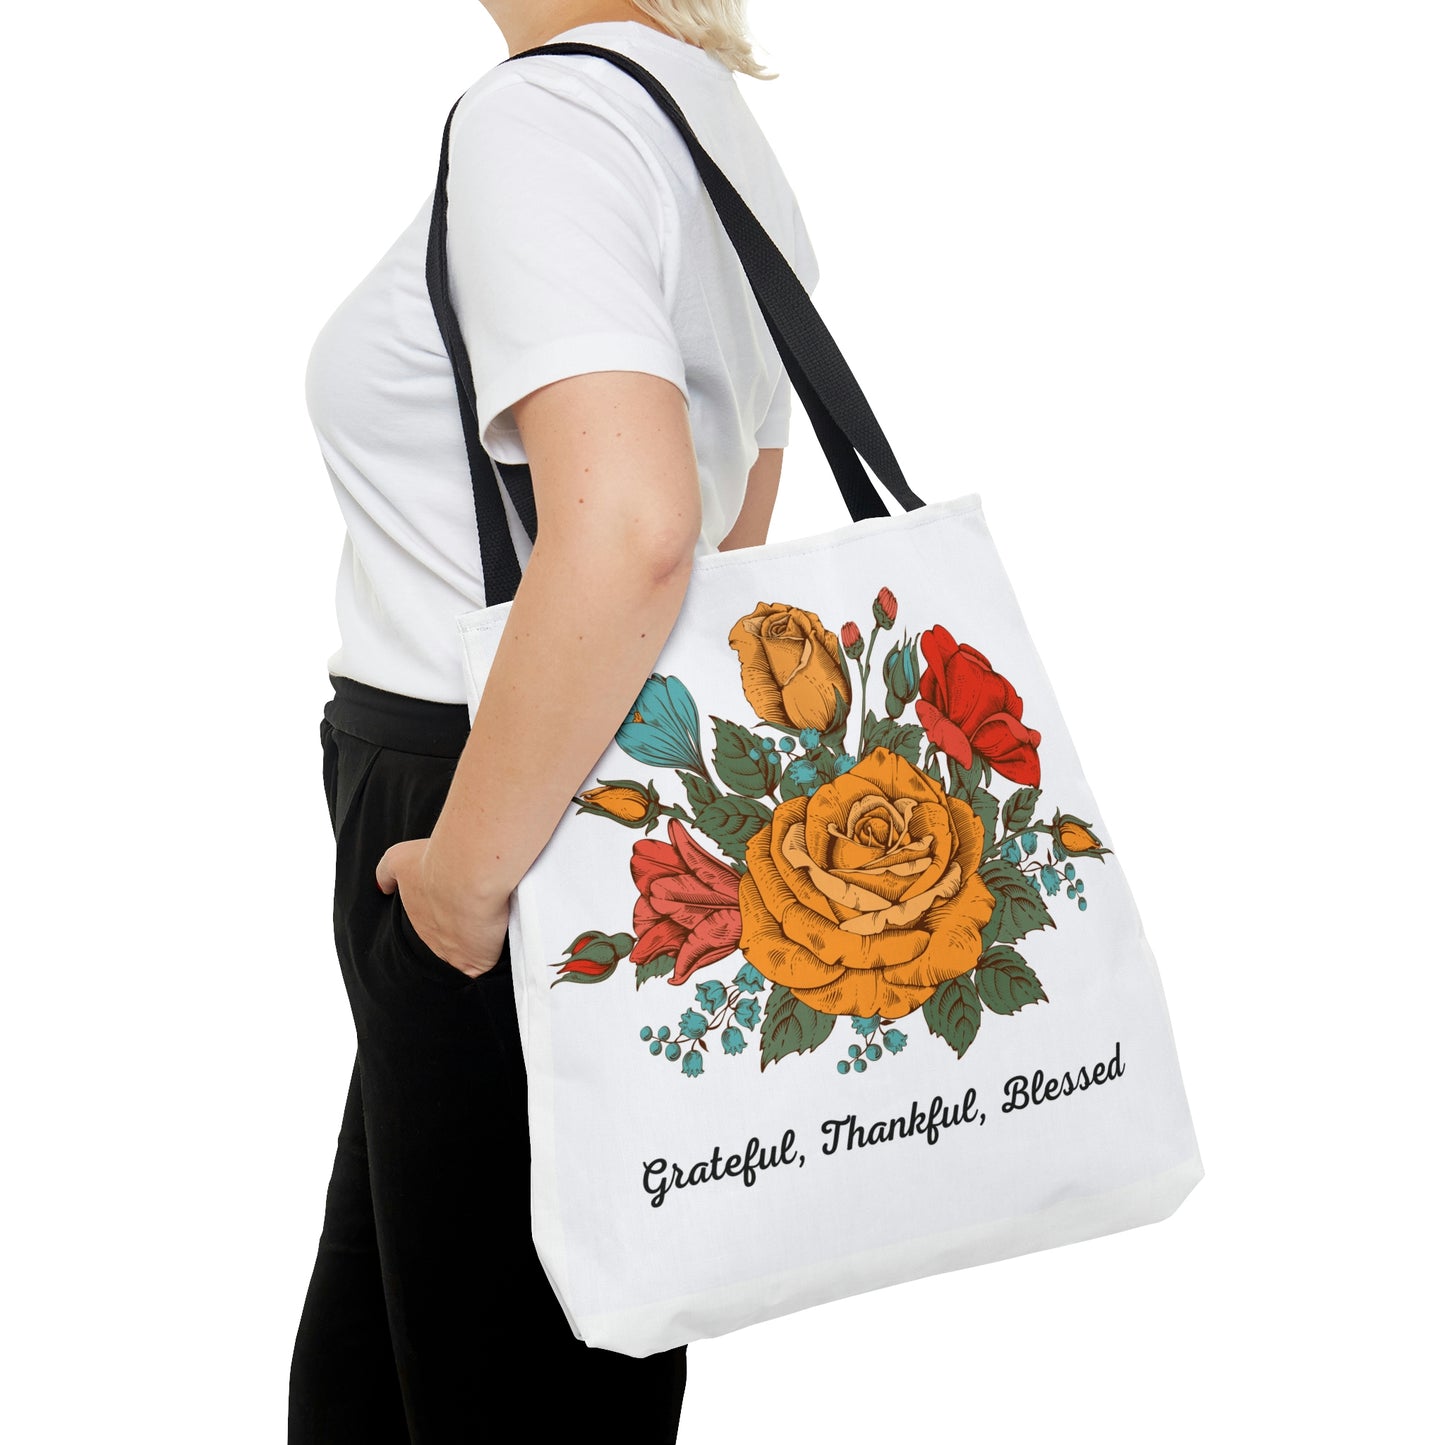 Grateful, Thankful, Blessed Tote Bag